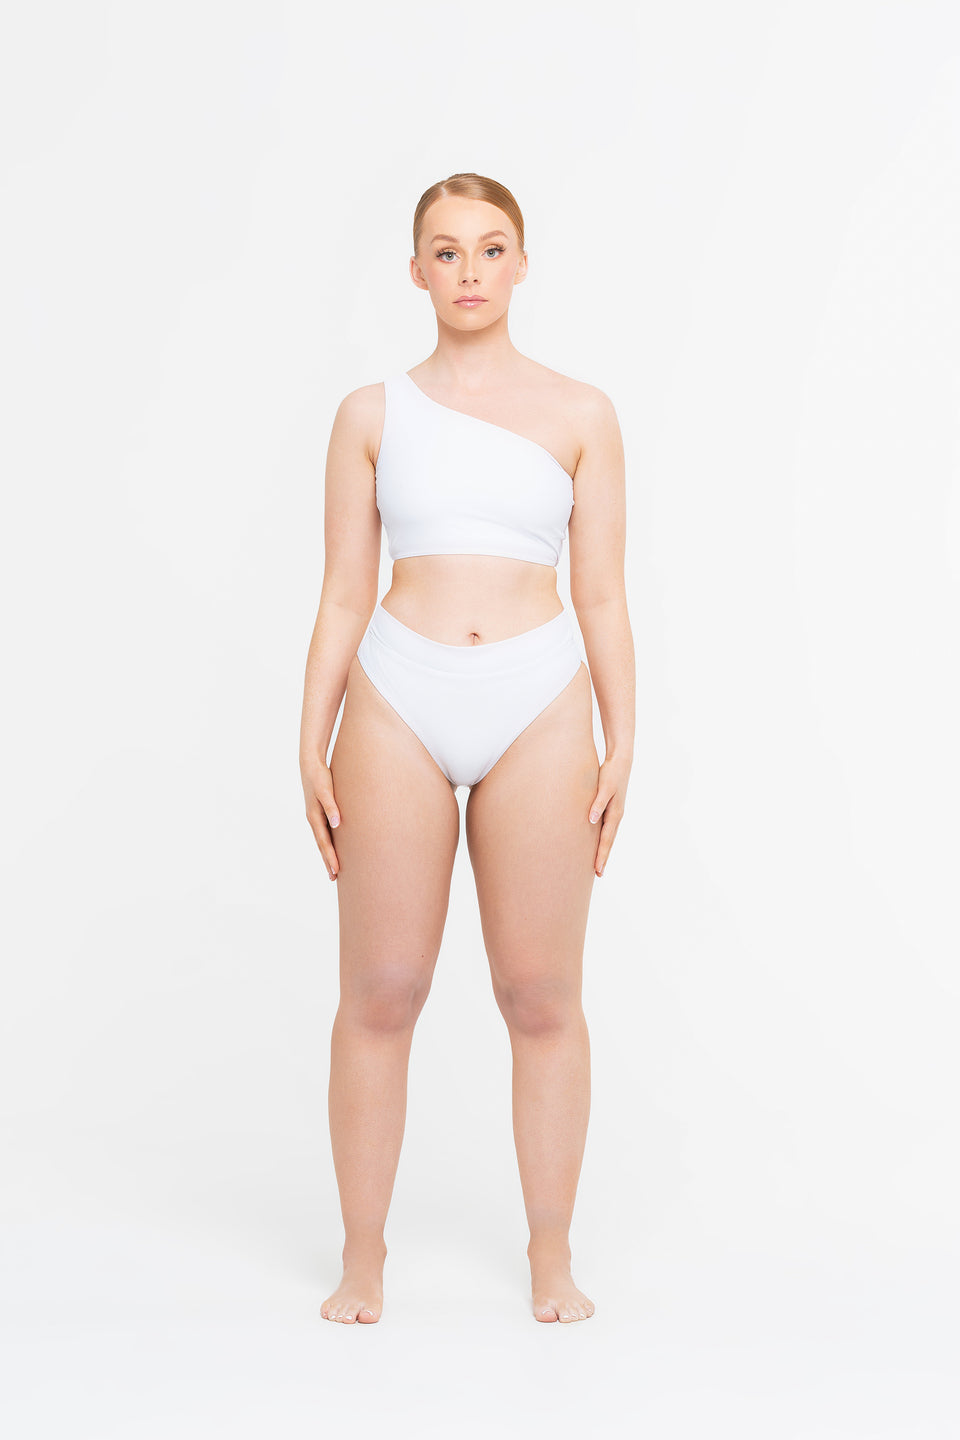 Ilashe Asymmetric Bikini Top / Fuller Bust A - G cup sizes / White – All  Peace Label